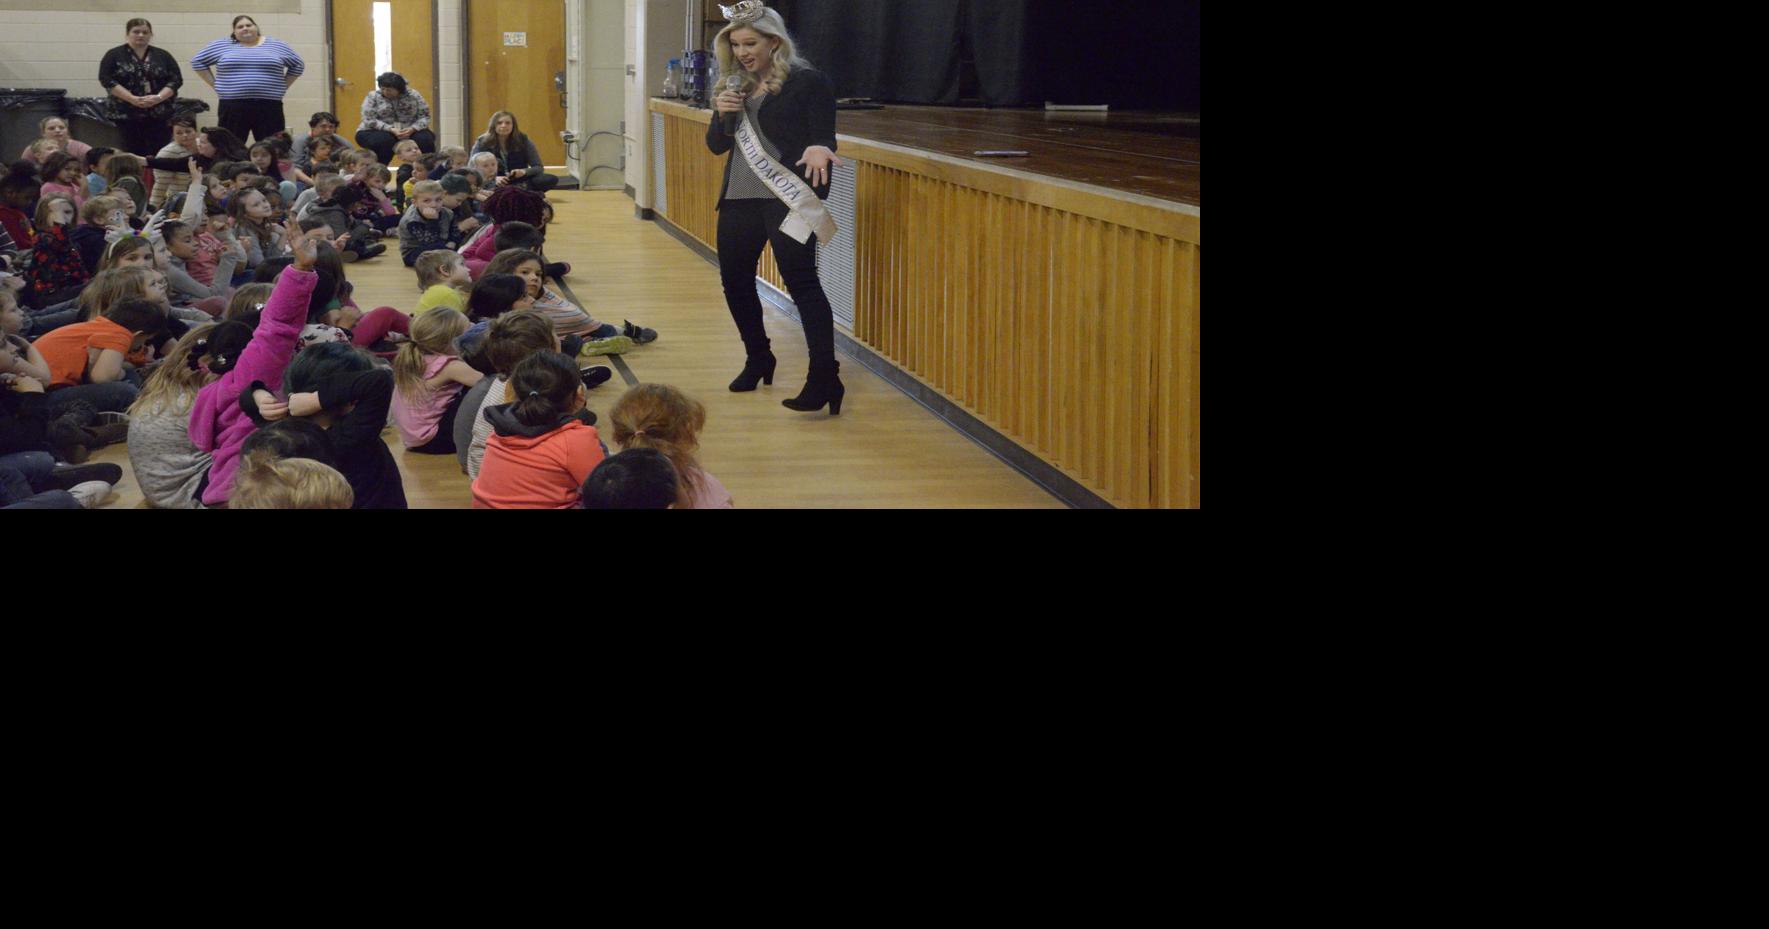 Miss North Dakota shares positive message with students | Community ...